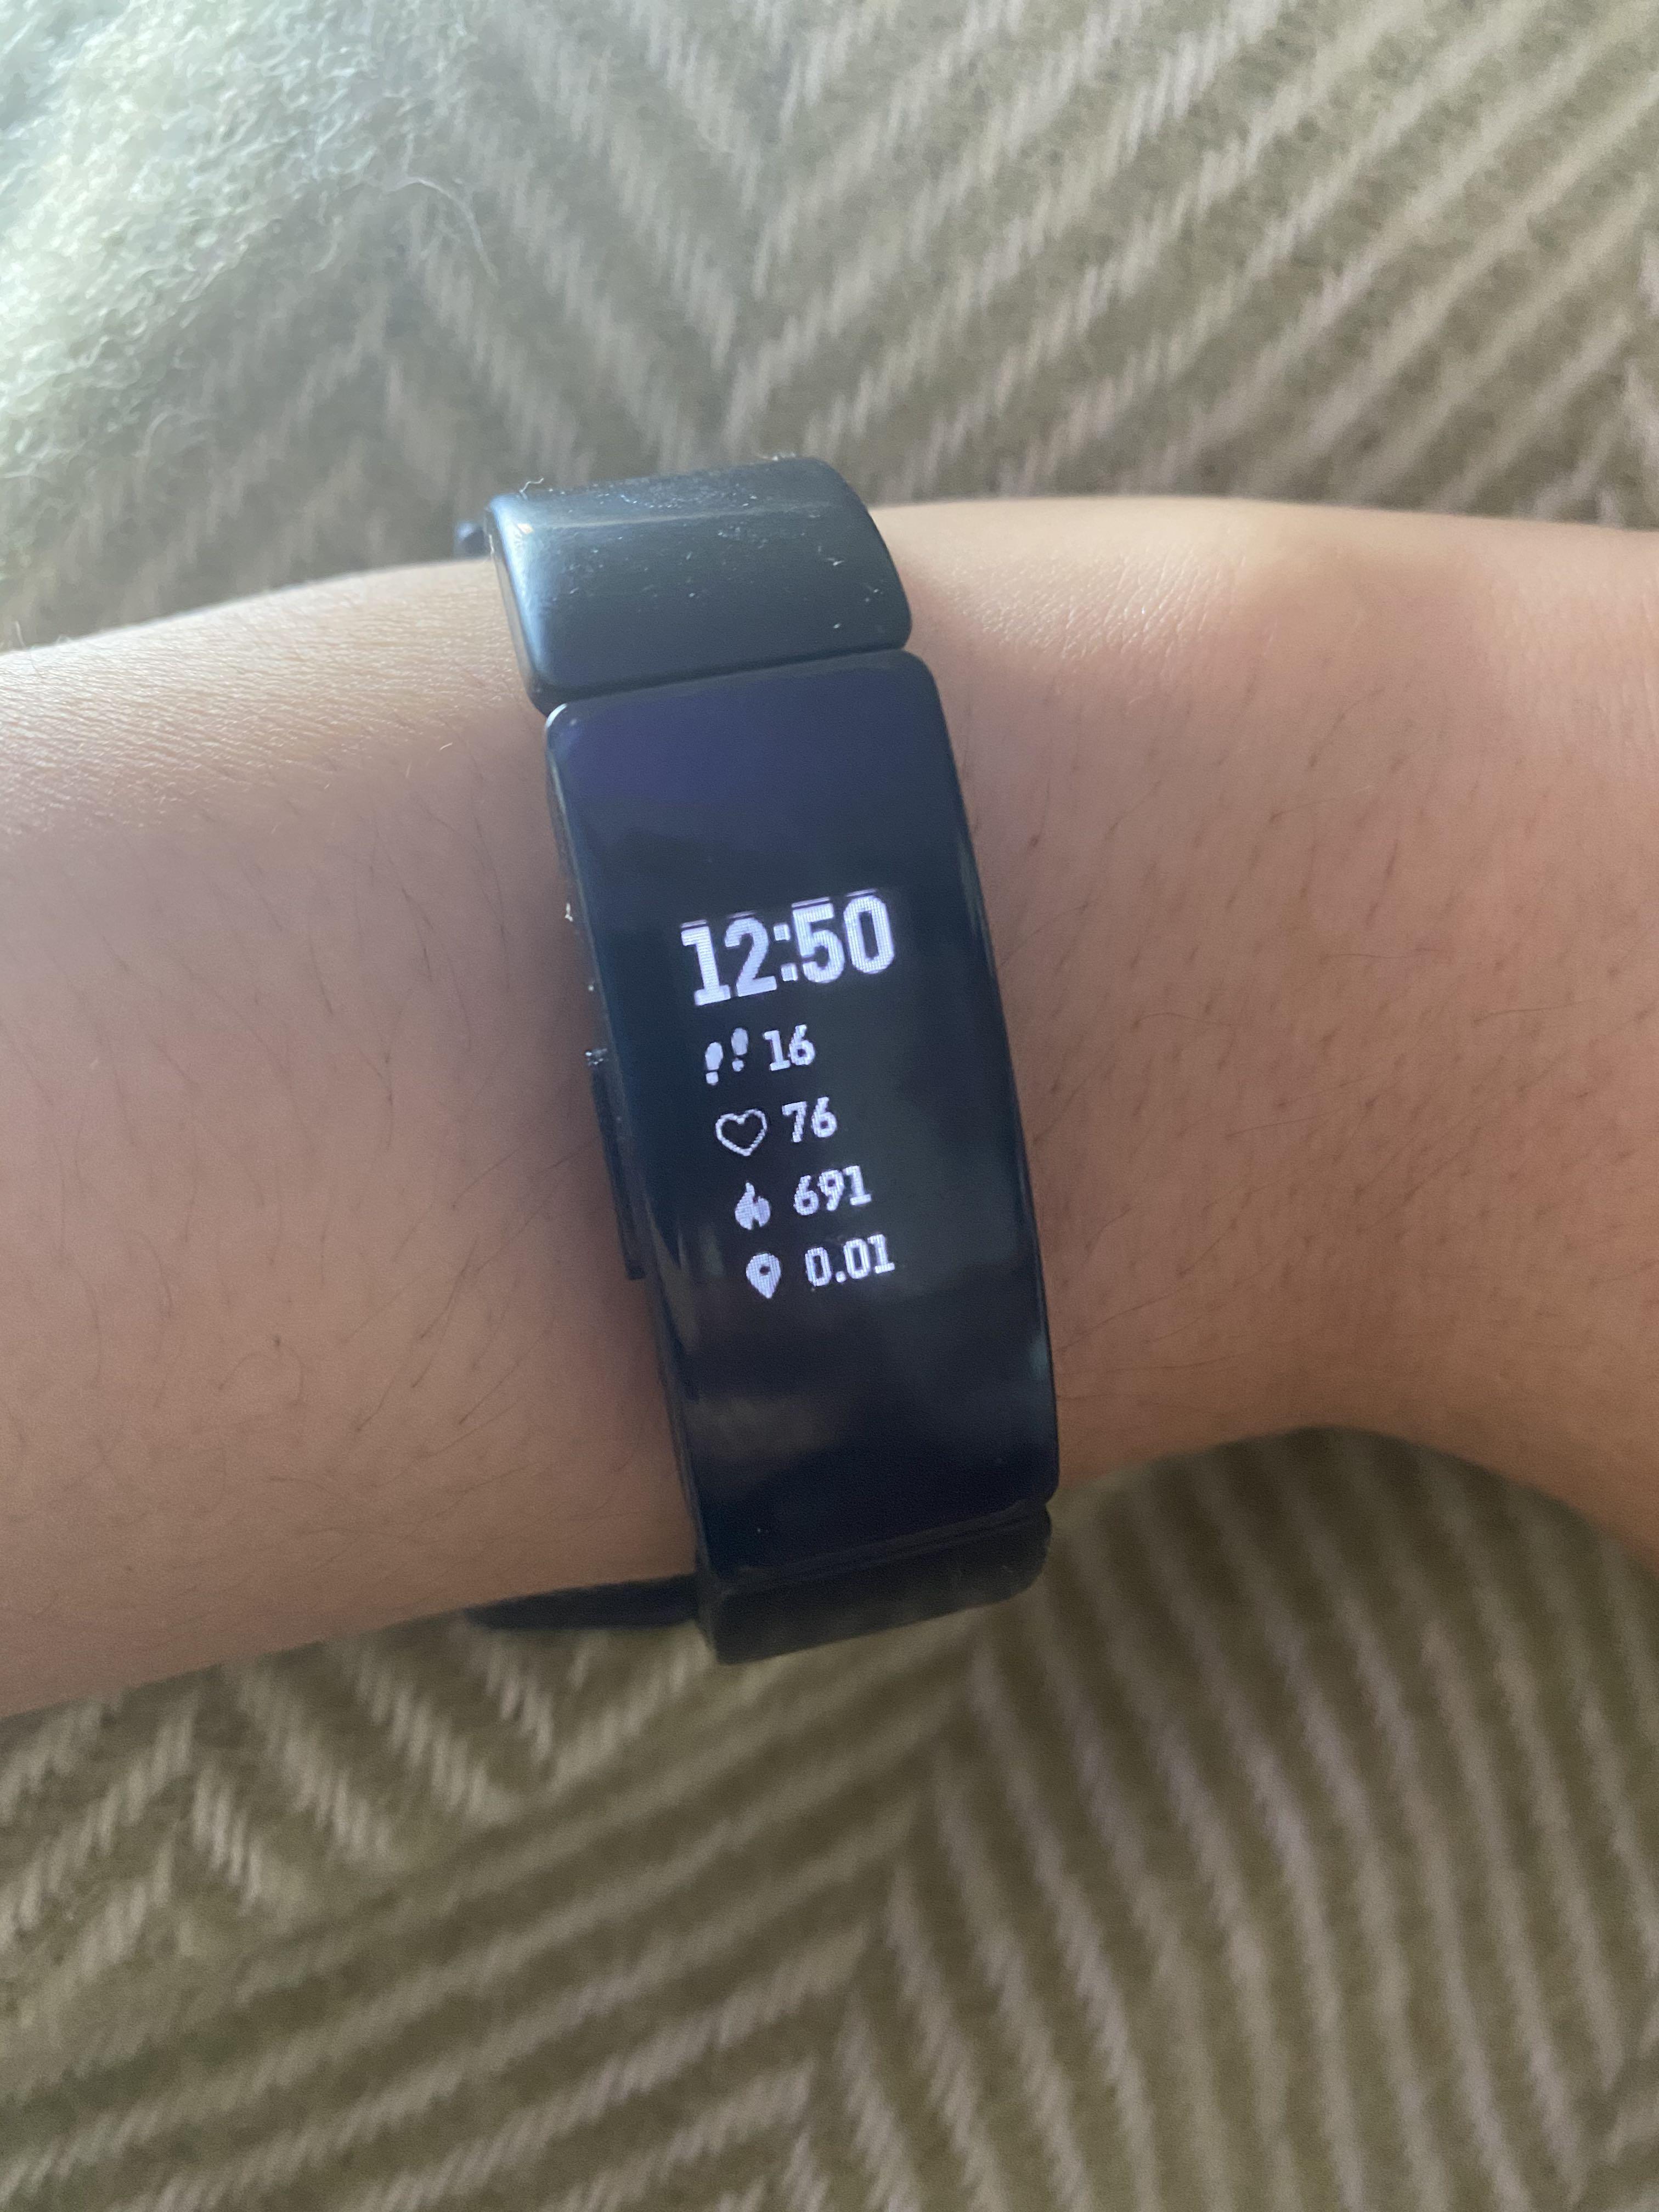 fitbit login issues 2019